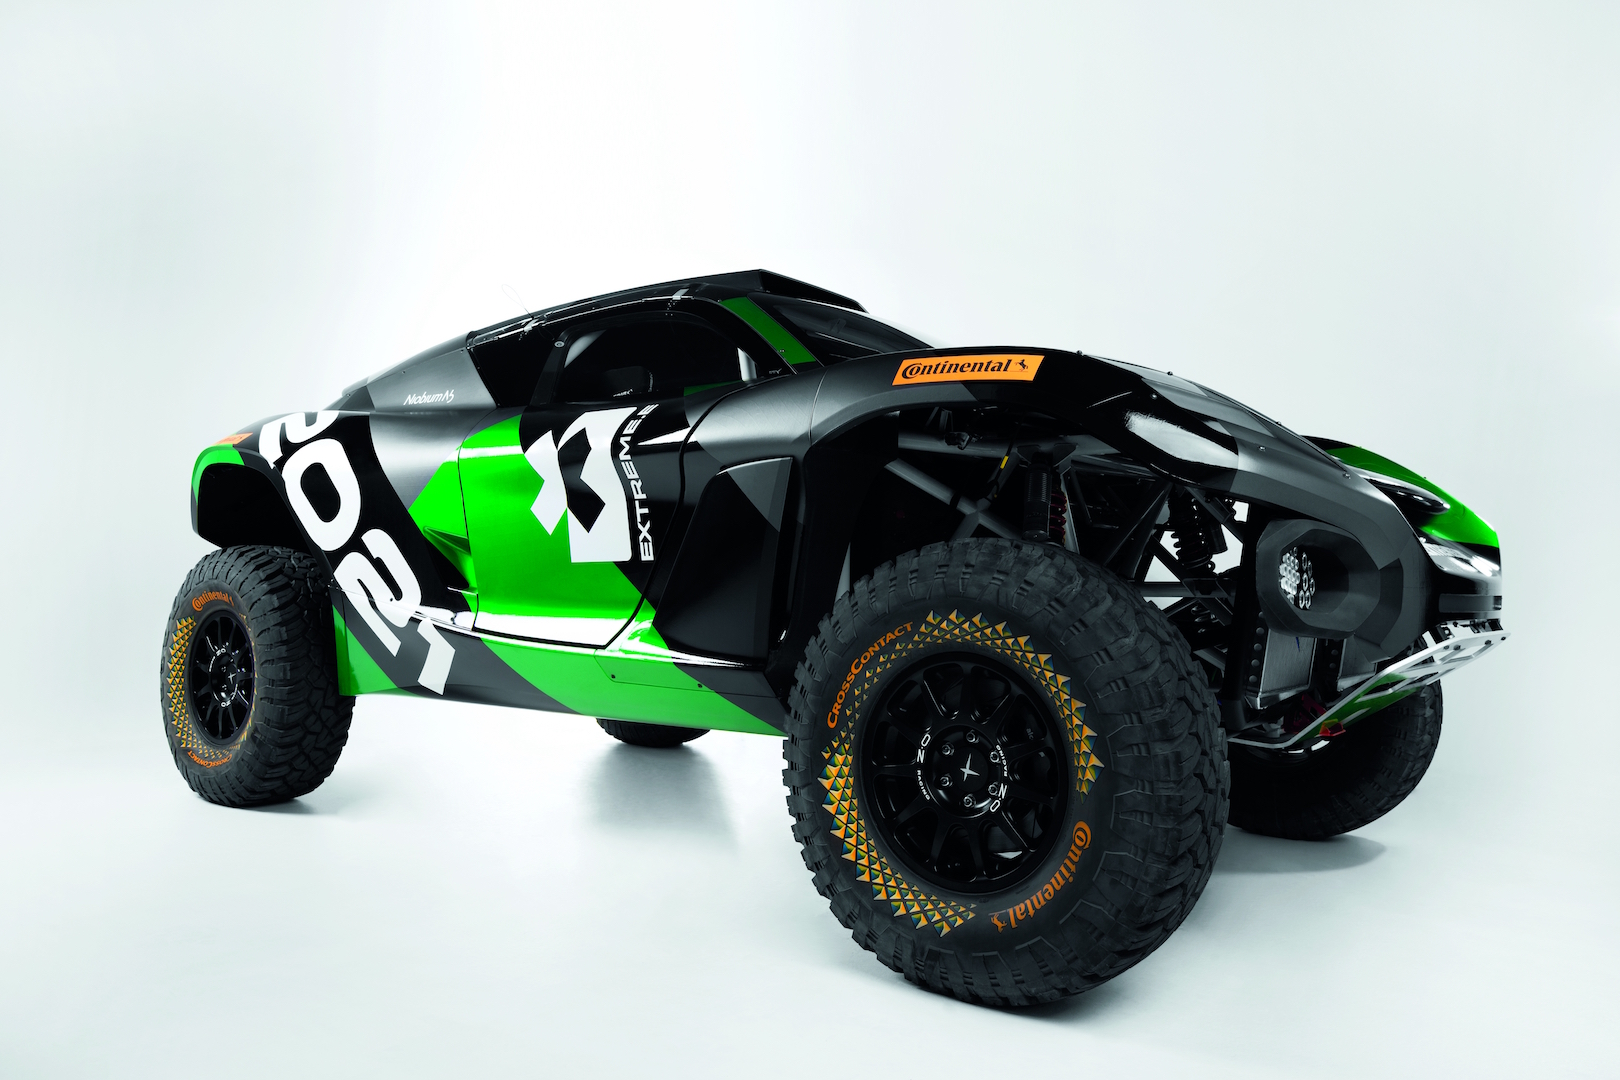 Electric cars are taking on traditional motorsports from Formula E to rally driving with the launch of the Extreme E off-road racing series and the Odyssey 21 electric off-road racer